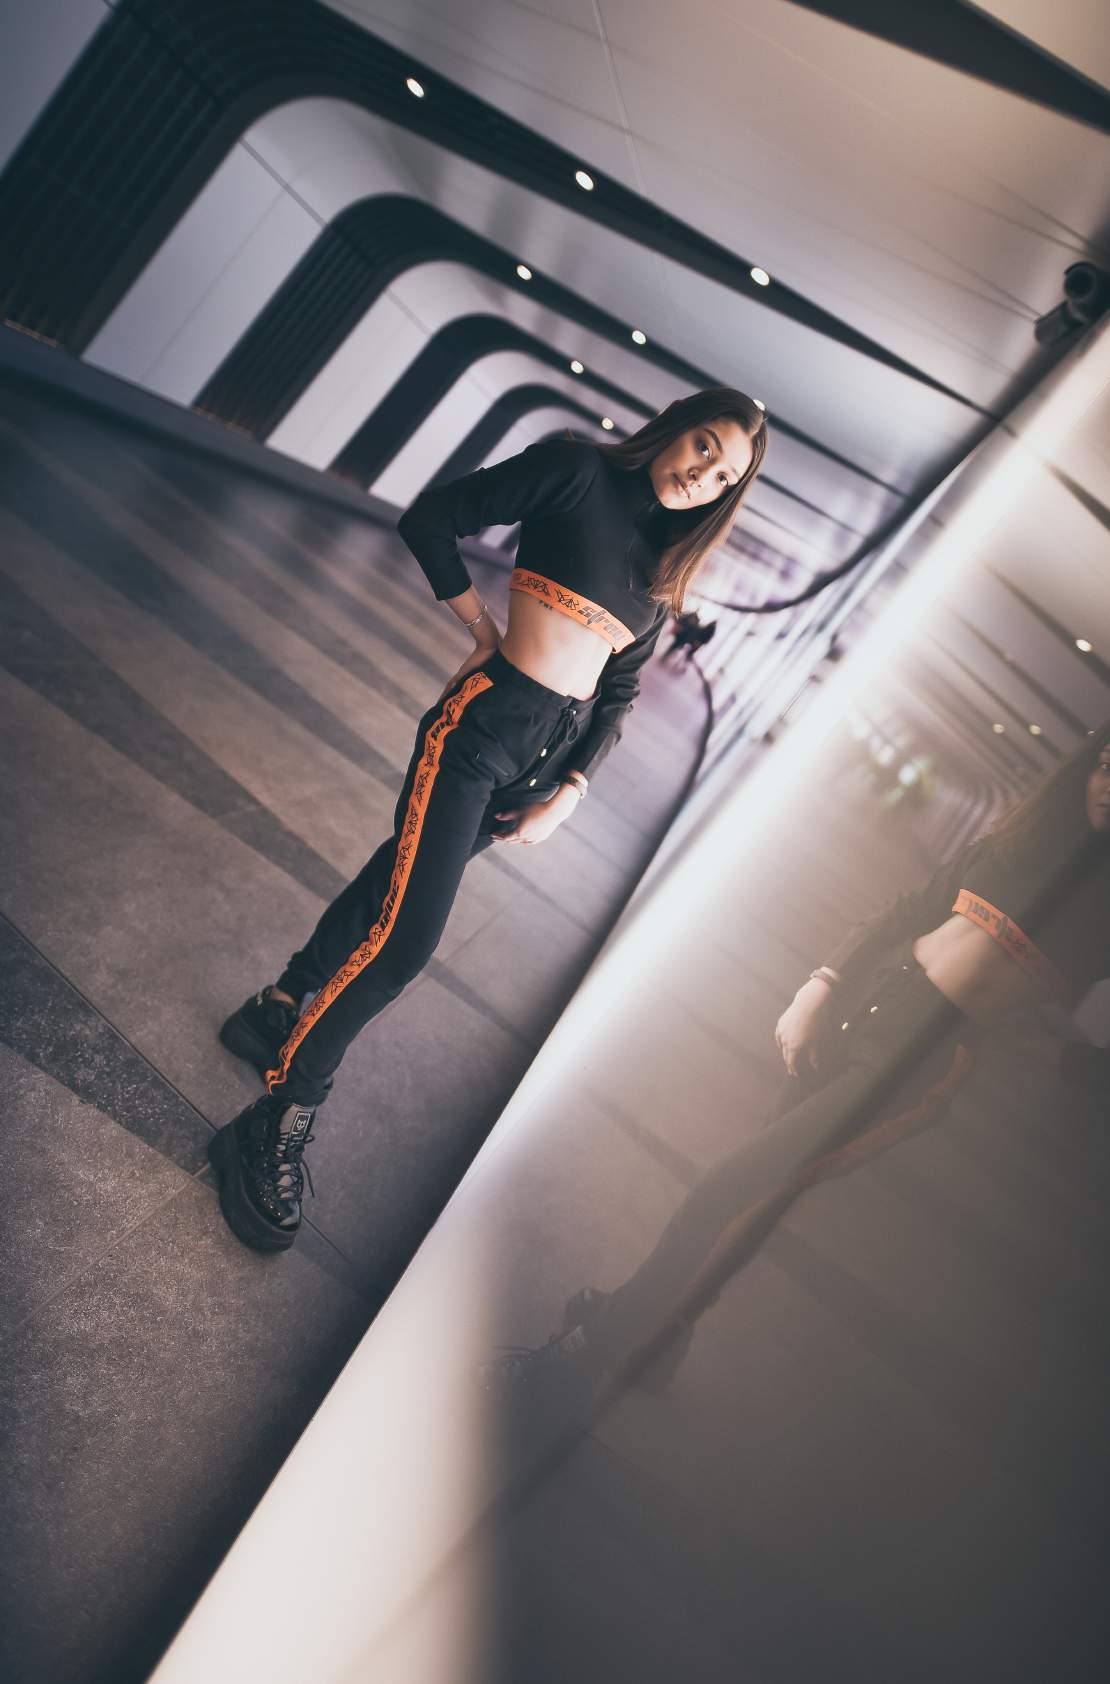 A girl wearing Black colored crop top with orange band at the bottom with a zip in the front and black and orange track pants with orange strips on the side of the track pant and high boots. Standing in a subway.